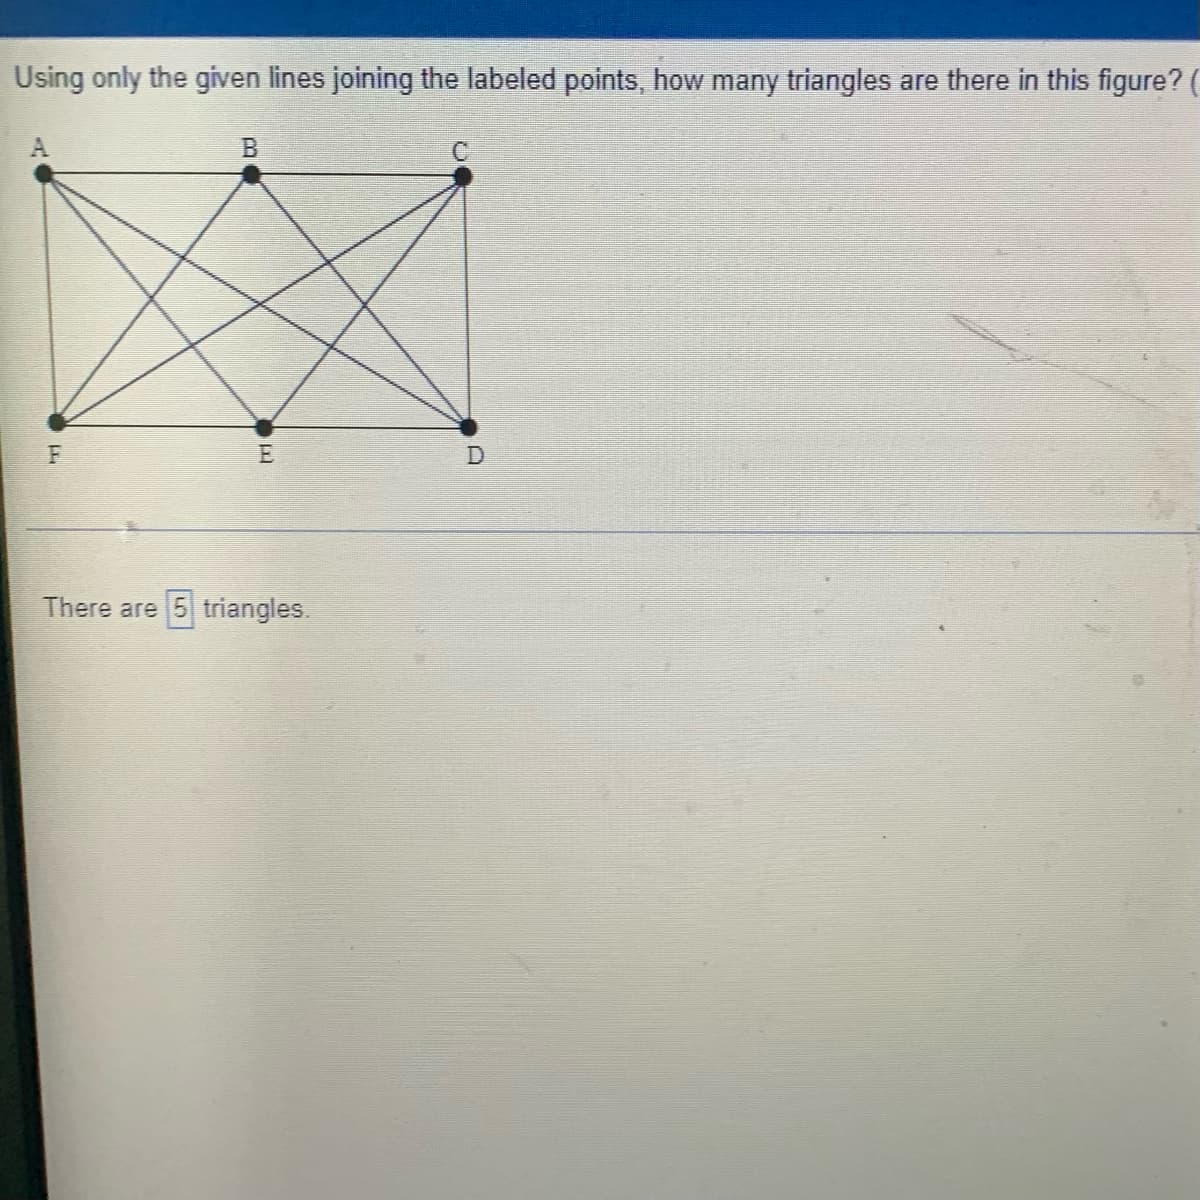 Using only the given lines joining the labeled points, how many triangles are there in this figure?
B.
F
There are 5 triangles.
